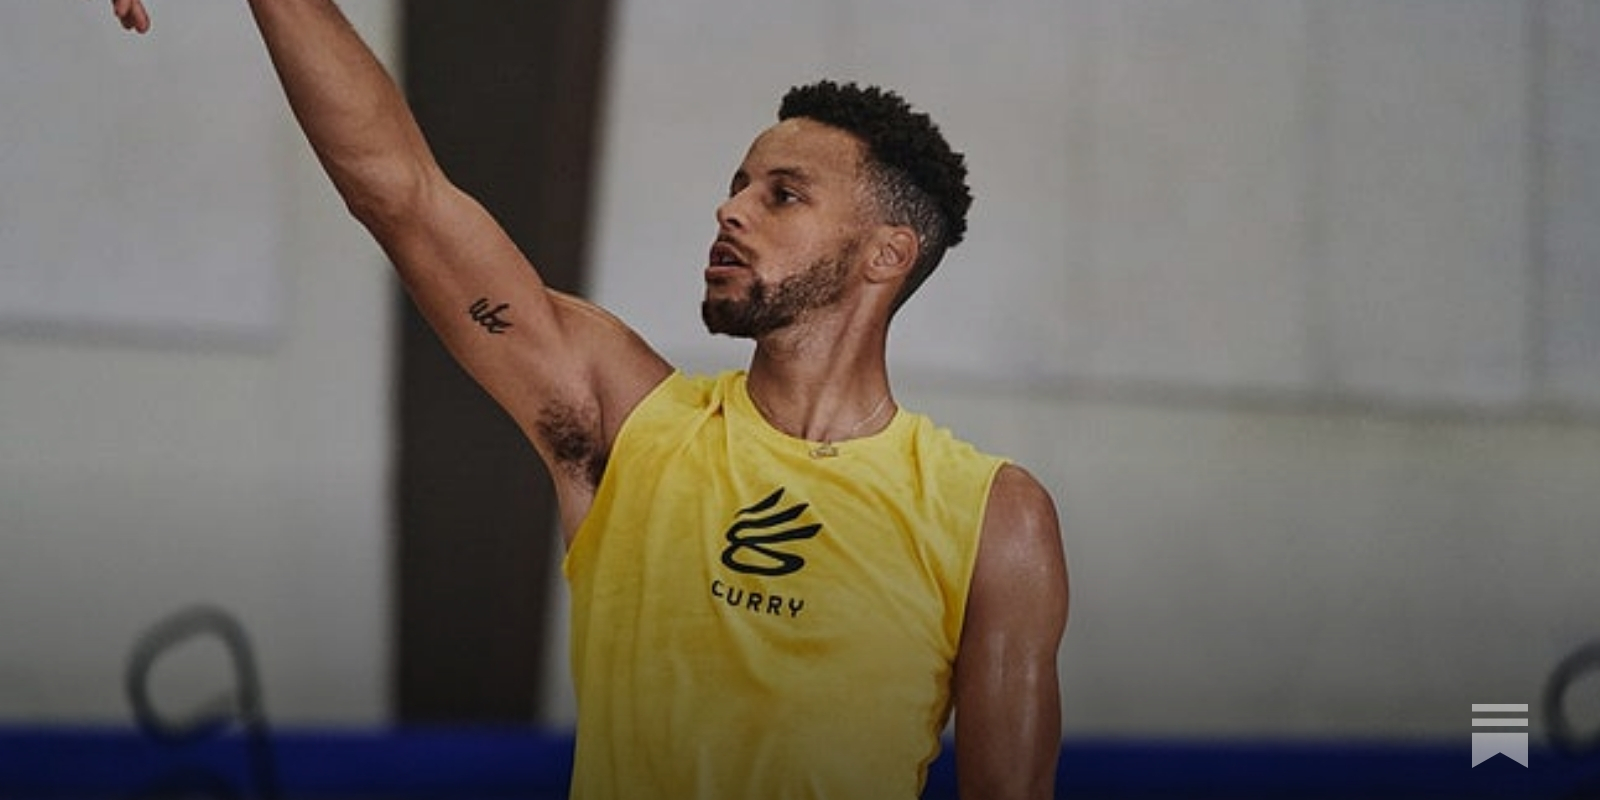 Stephen Curry launches Curry Brand with Under Armour